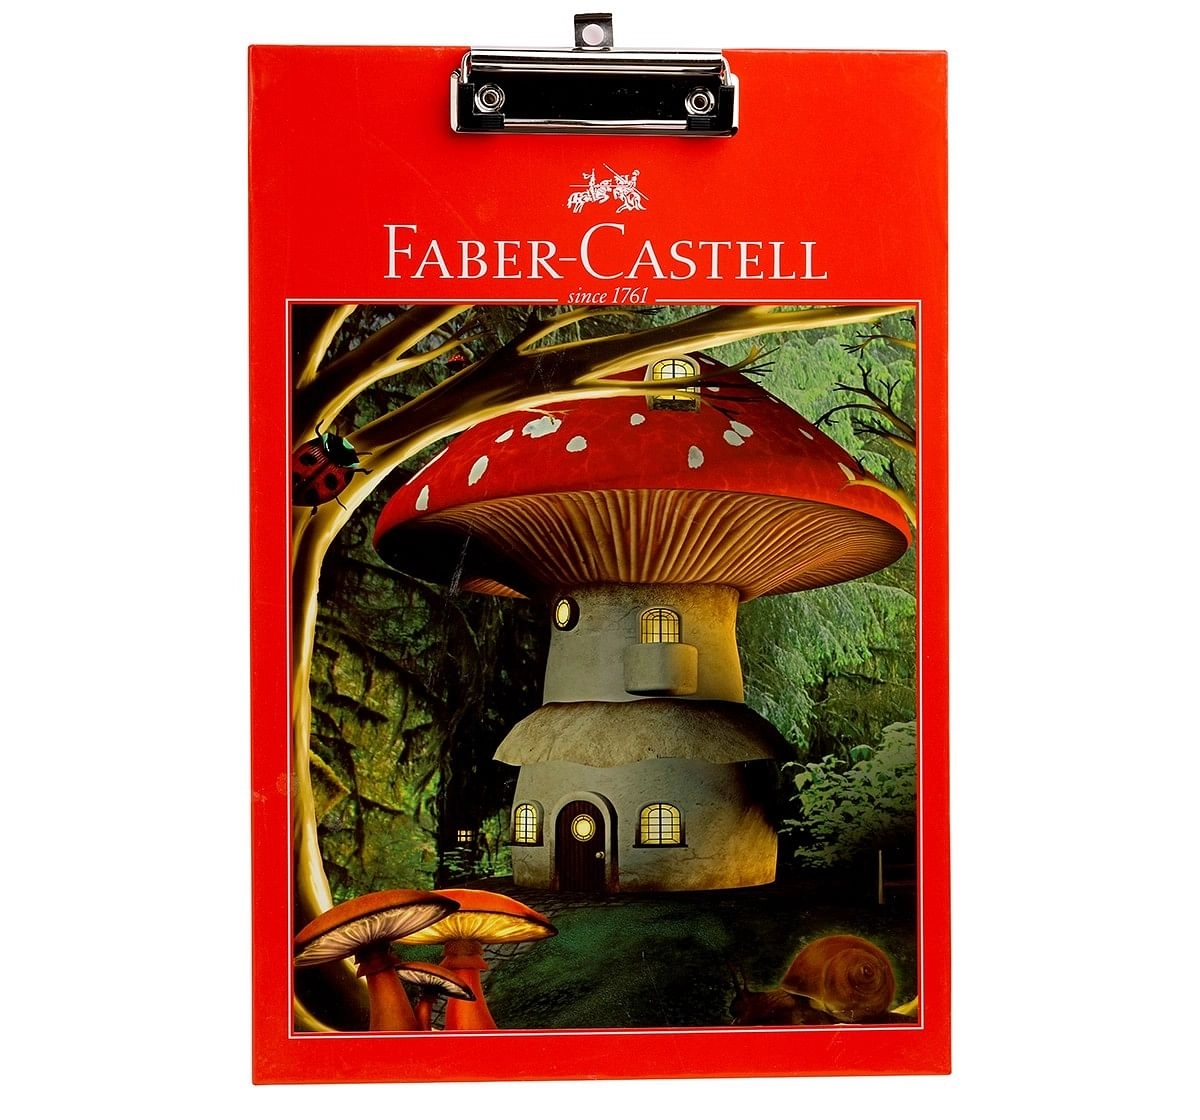 Faber-Castell  fabercastell exam pad, 10Y+